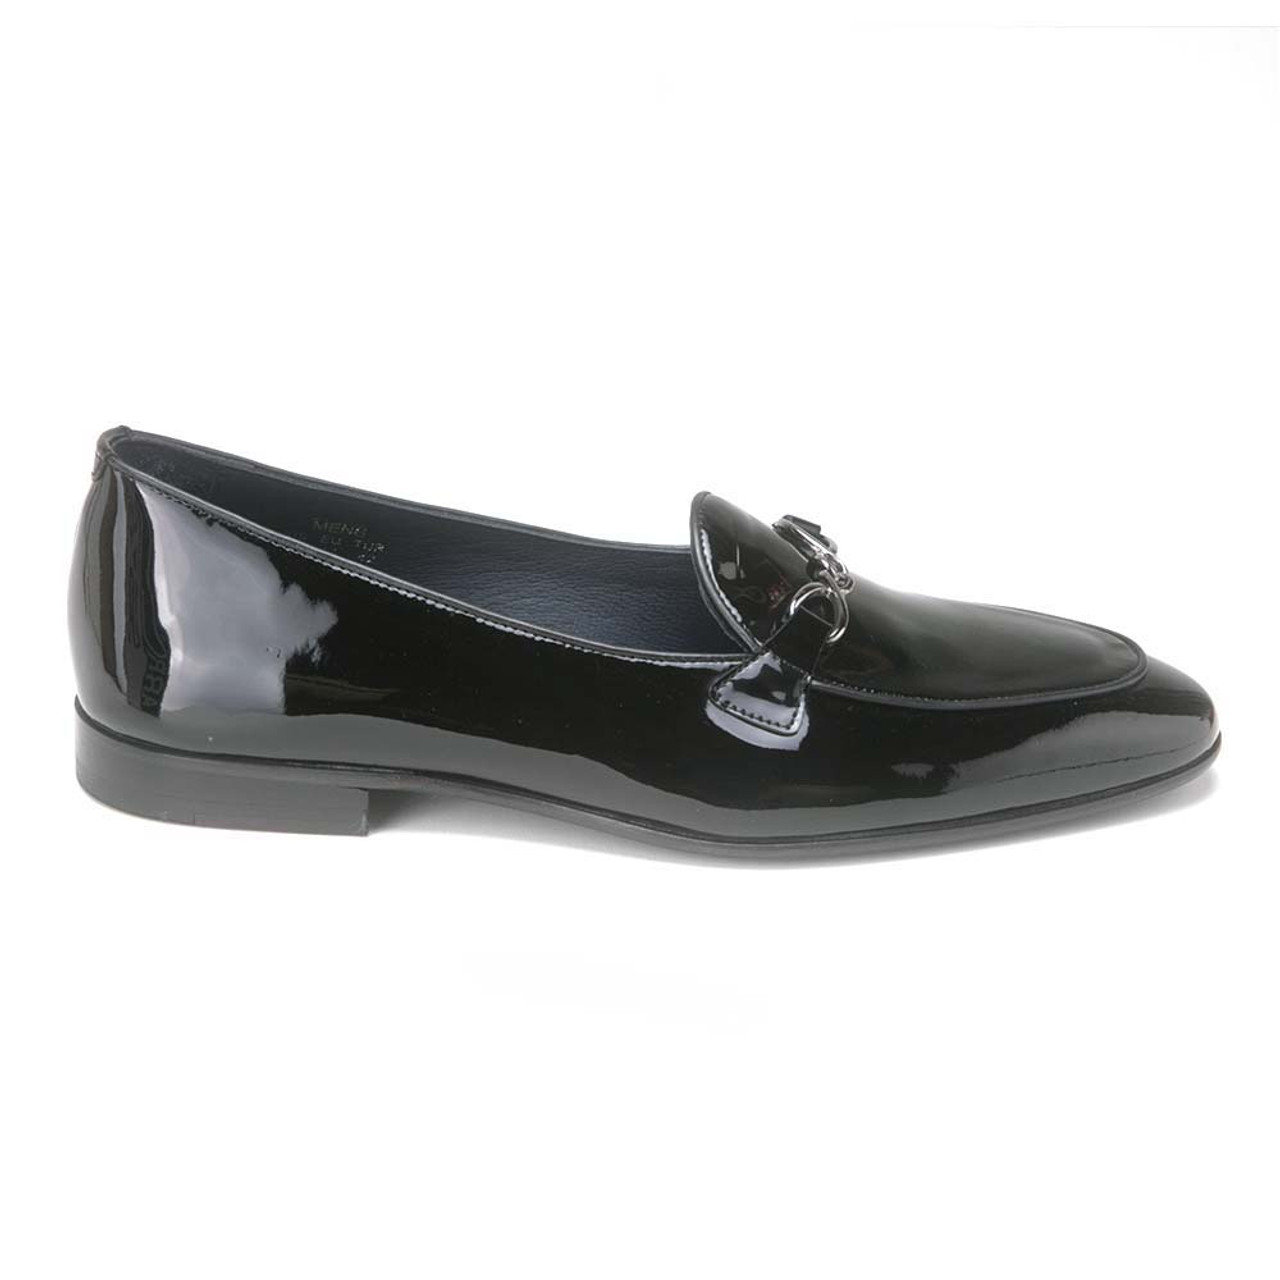 VellaPais Black Patent Leather Mens Loafers